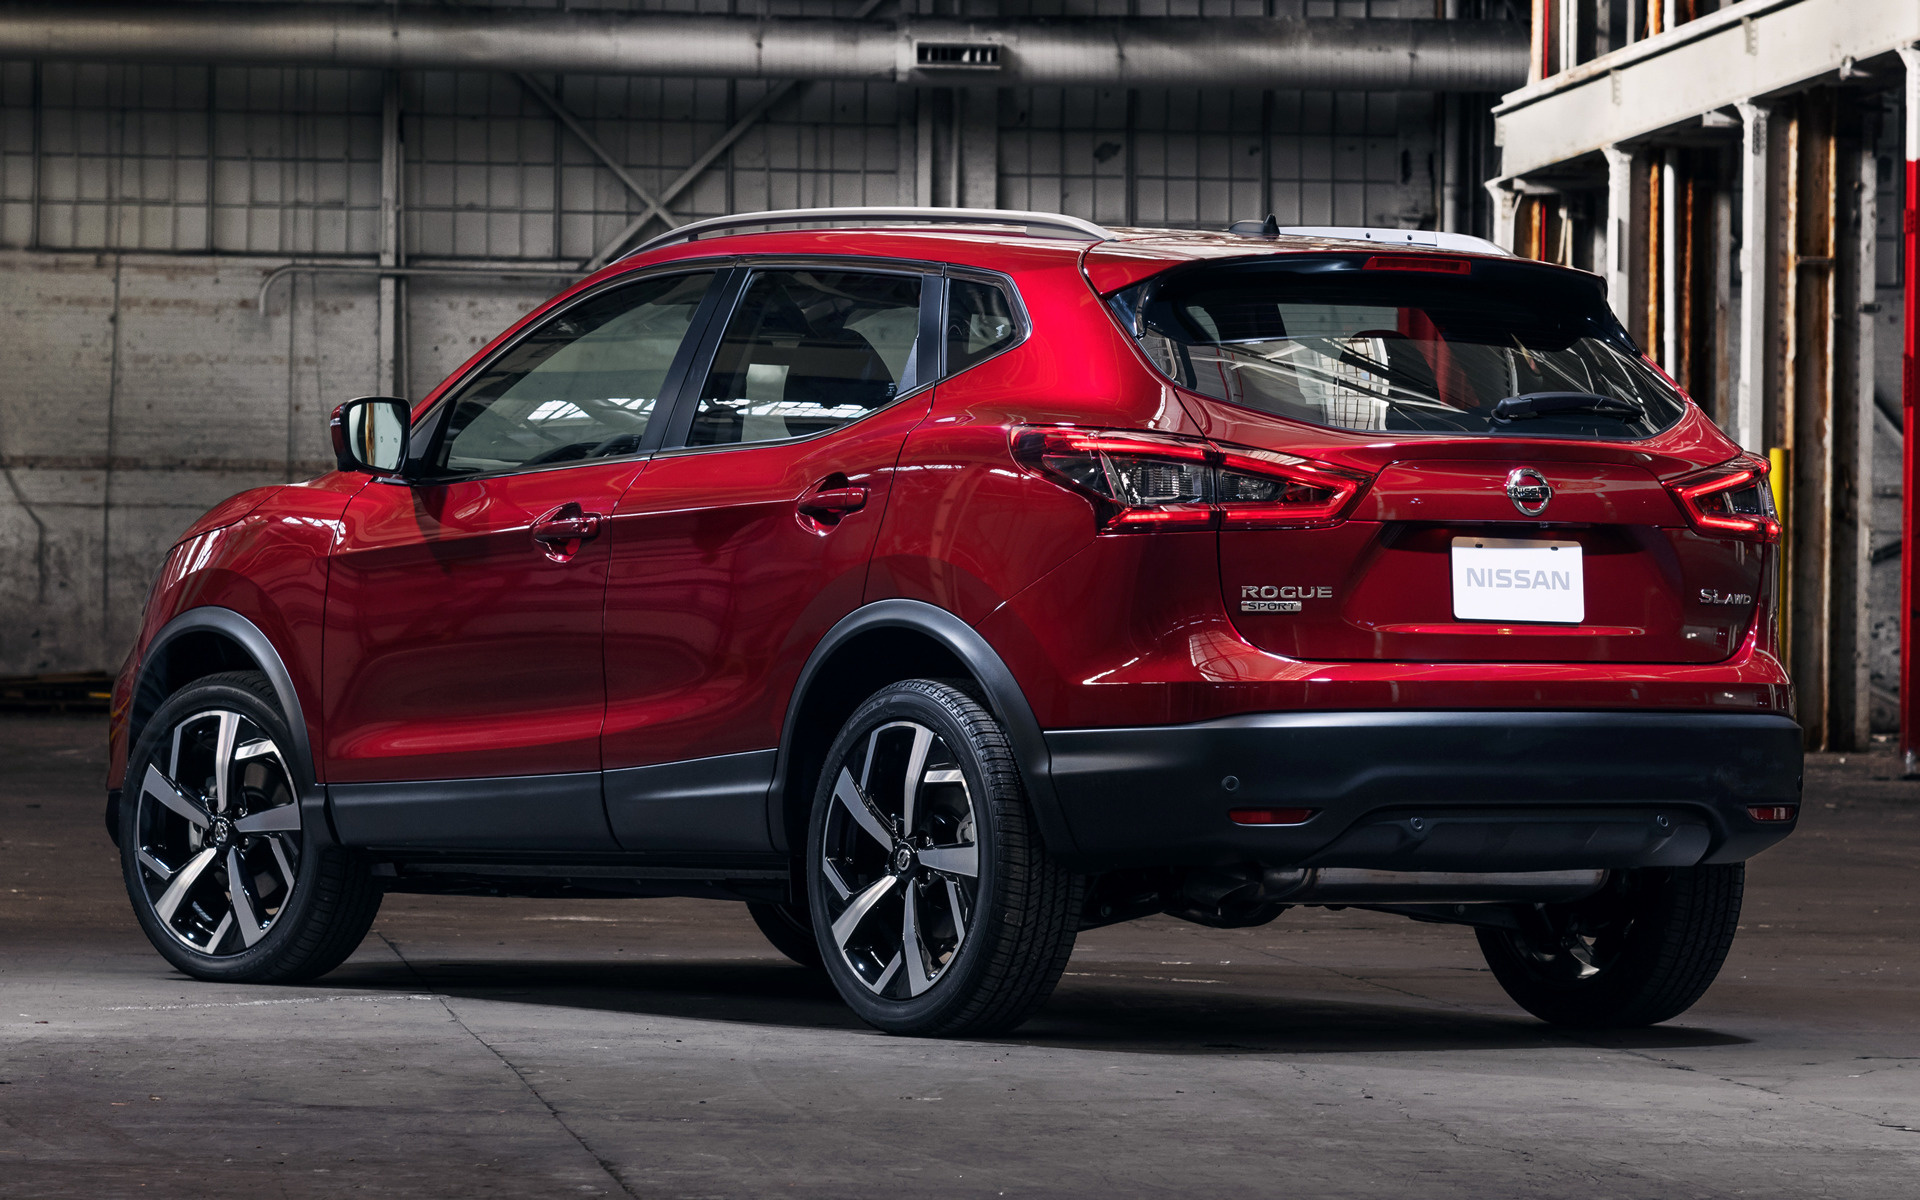 Nissan Rogue, 2020 model, HD wallpapers and images, 1920x1200 HD Desktop